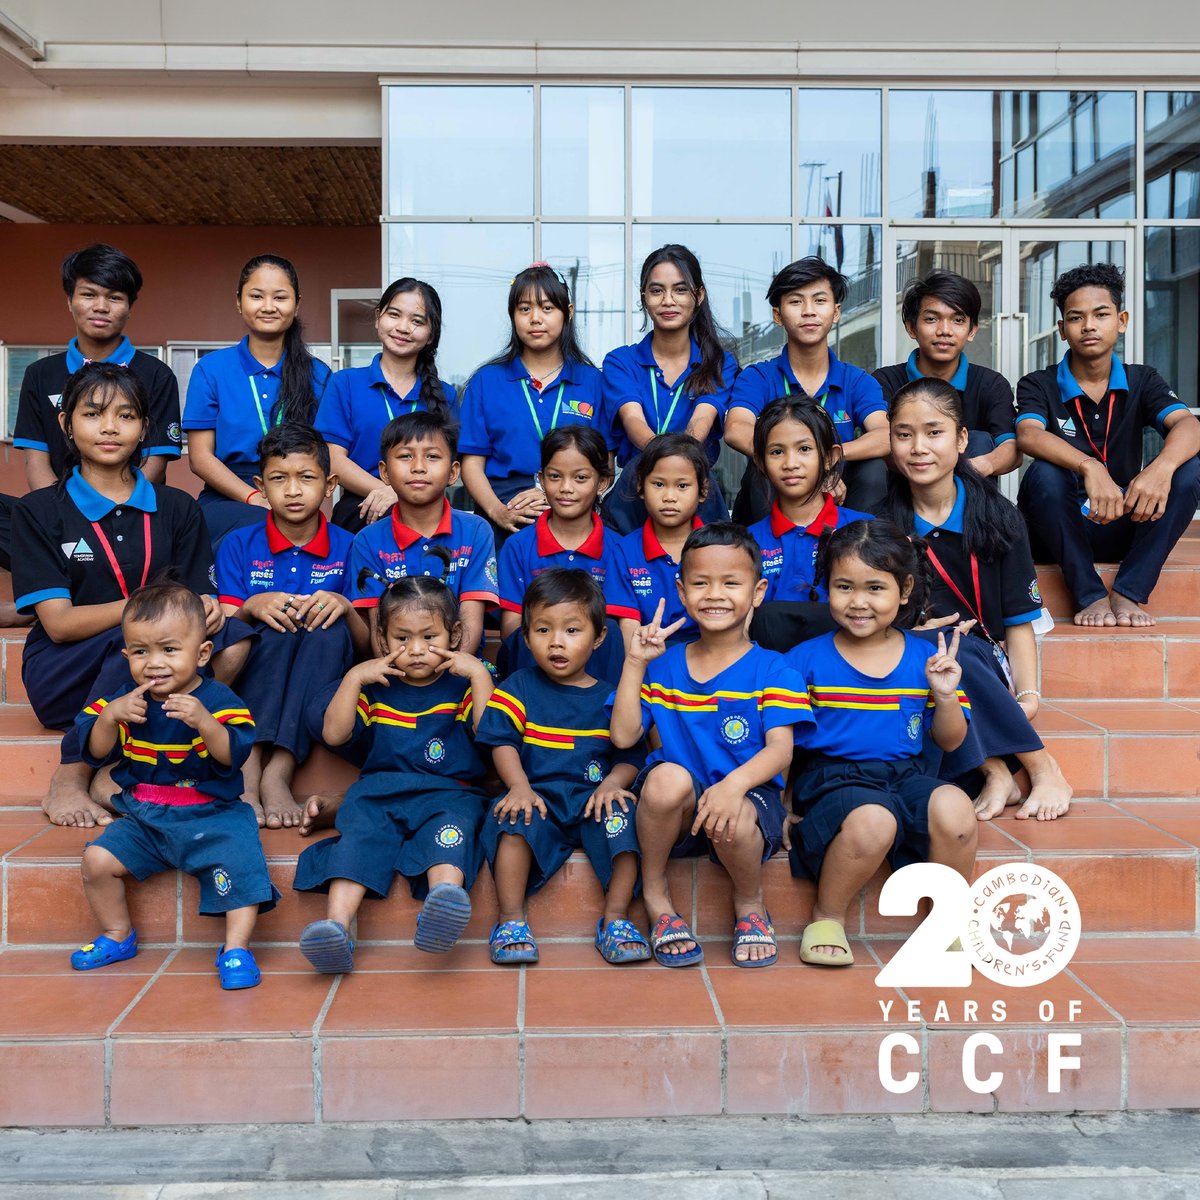 To celebrate 20 years of transforming lives in Cambodia, we gathered CCF students ranging from 1 year old to 20 years old from our nursery, kindergarten, primary school, and secondary school programs. #20YearsofCCF #SDG4 #QualityEducation